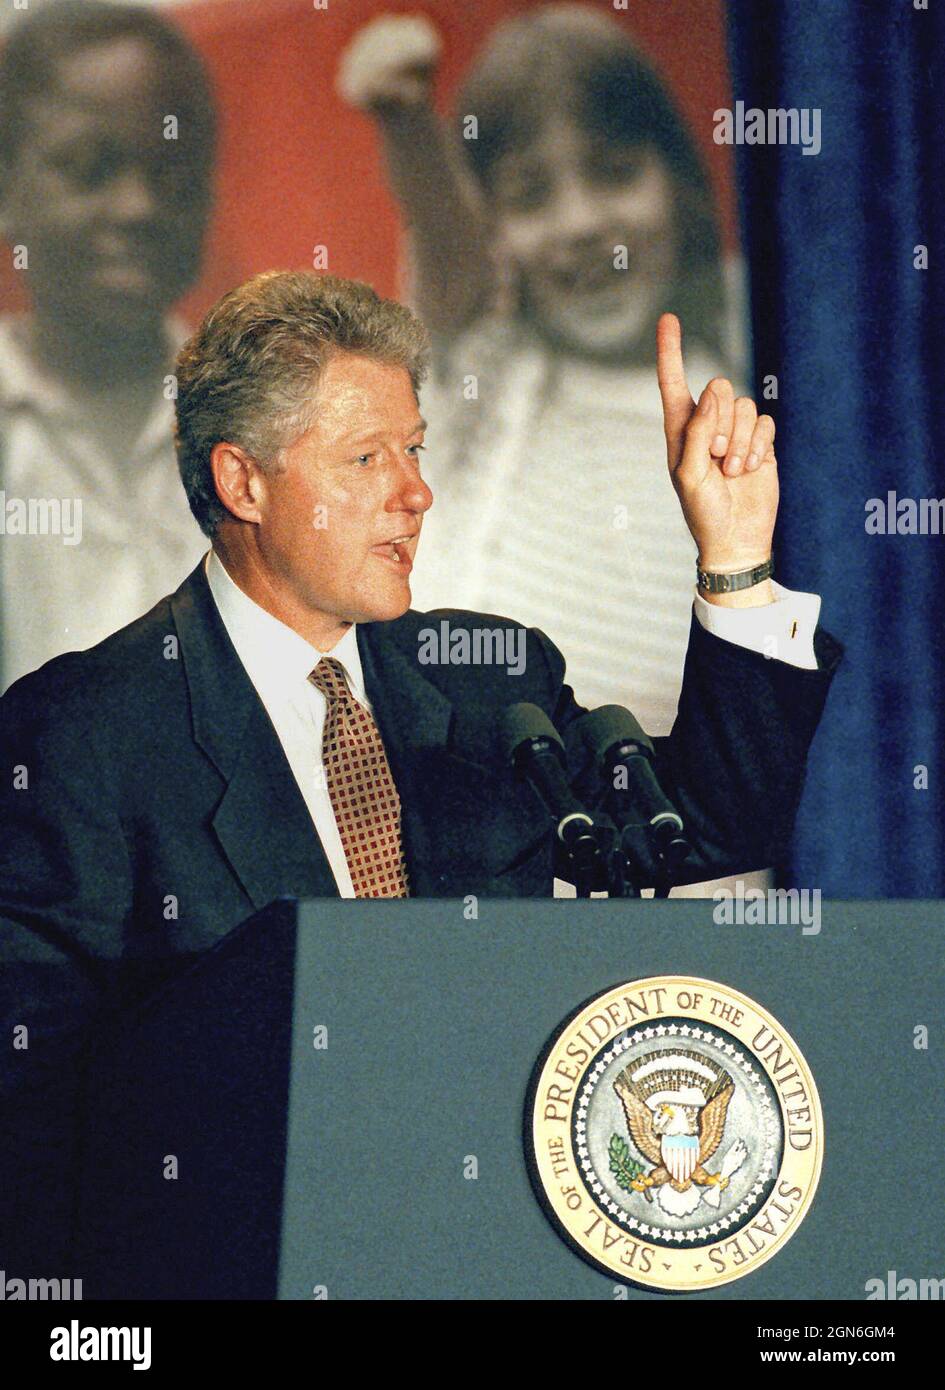 President Bill Clinton speaks during a meeting of the Southern Governors' Association on Monday, Sept. 10, 1996 at The Ritz-Carlton hotel in Kansas City, Jackson County, MO, USA. Clinton discussed the Personal Responsibility and Work Opportunity Reconciliation Act of 1996 welfare-reform bill — a cornerstone of the Republican Party's 'Contract With America' legislative agenda — which he signed into law last month, implementing major reforms to U.S. social welfare policy by forcing most welfare recipients to get jobs or lose benefits. (Apex MediaWire Photo by Timothy J. Jones) Stock Photo